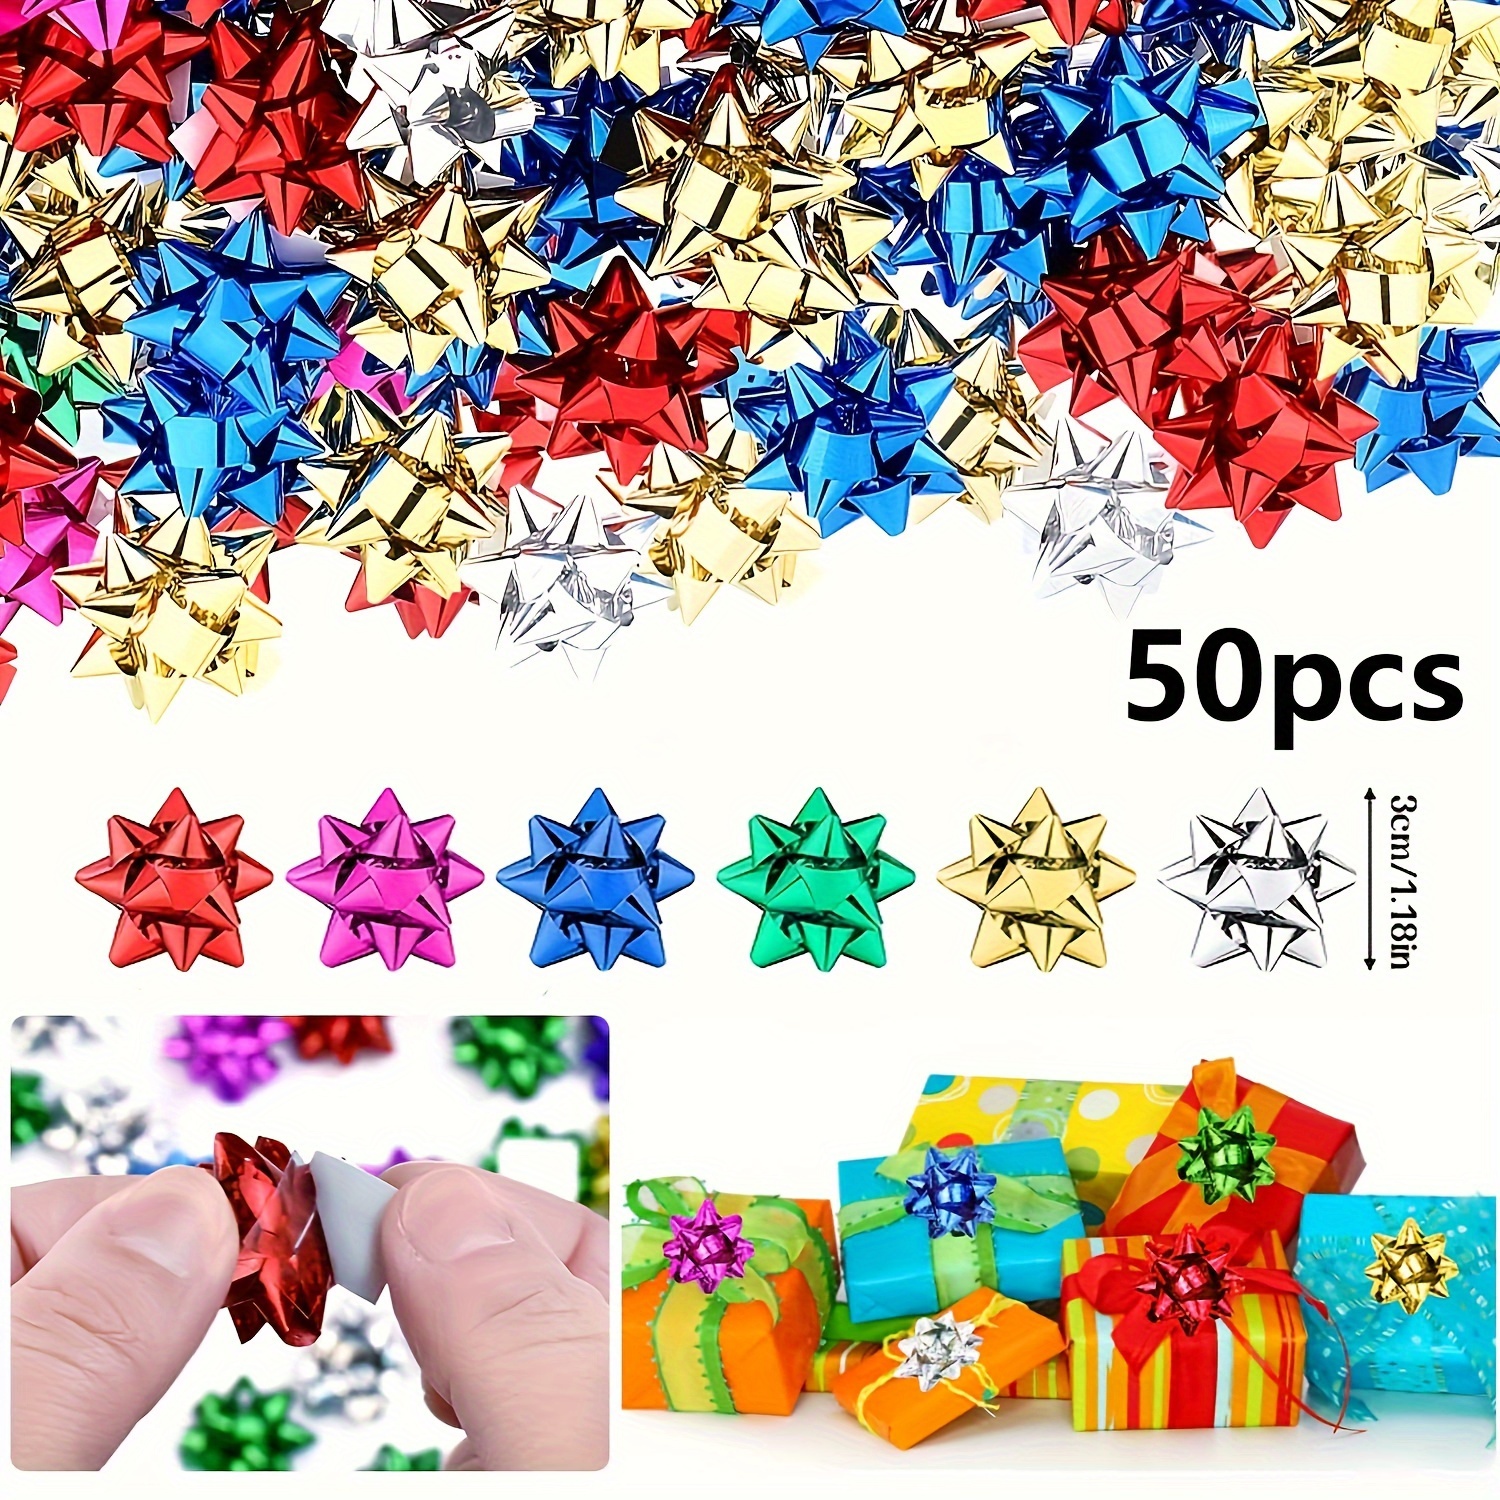 Mini Gift Wrapping Star Bows, 1.5in Glitter Metallic Self-Adhesive Bow  (90pcs - Assorted Colors) Mini Gift Bow for Christmas Wrapping